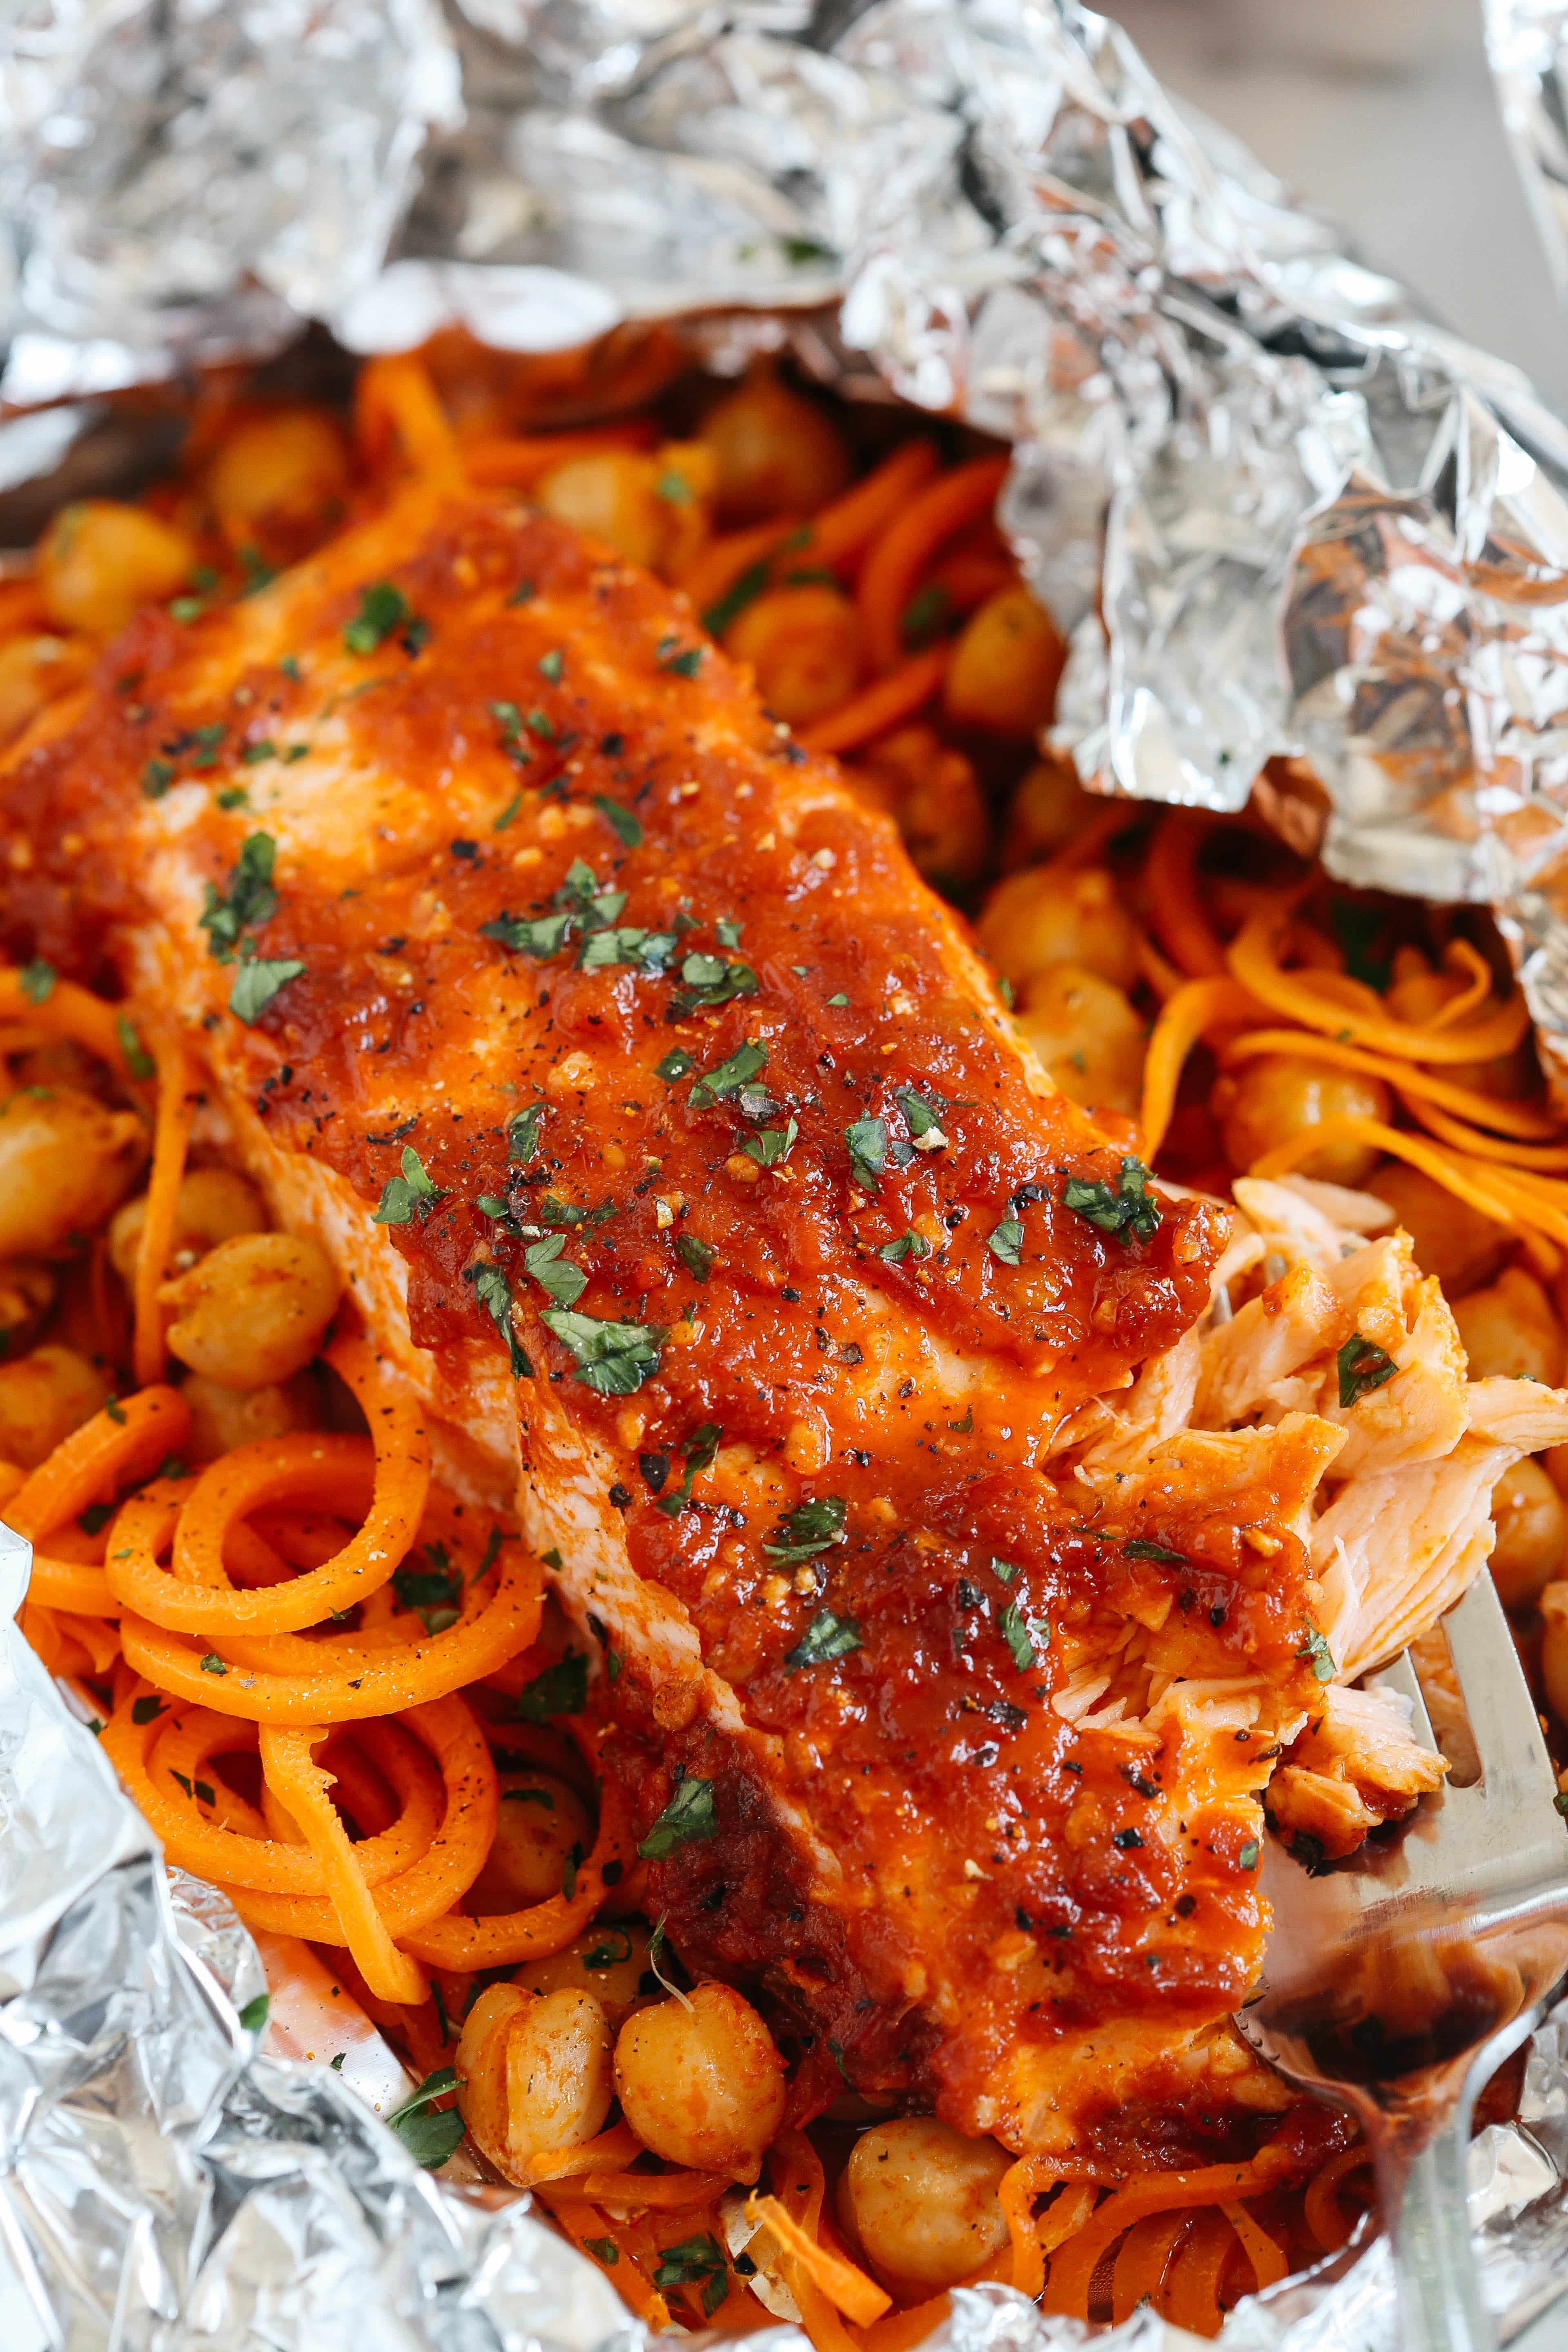 Moroccan Salmon Foil Packets with Carrot Noodles & Chickpeas